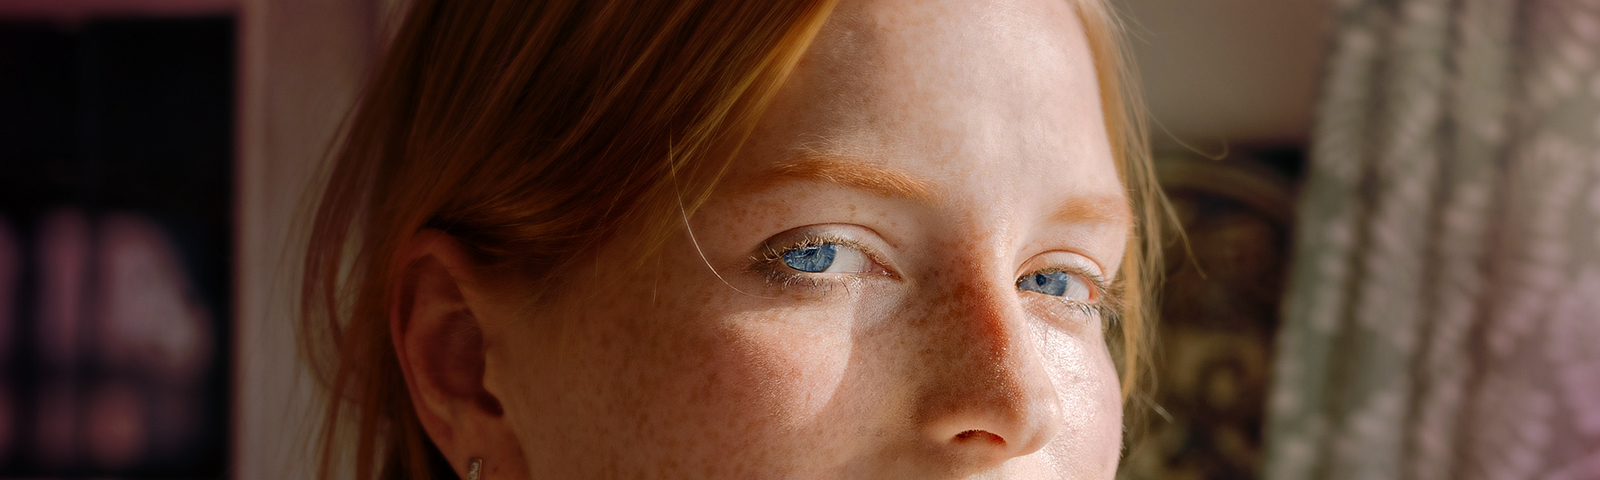 A woman with red hair and freckles looking pensive